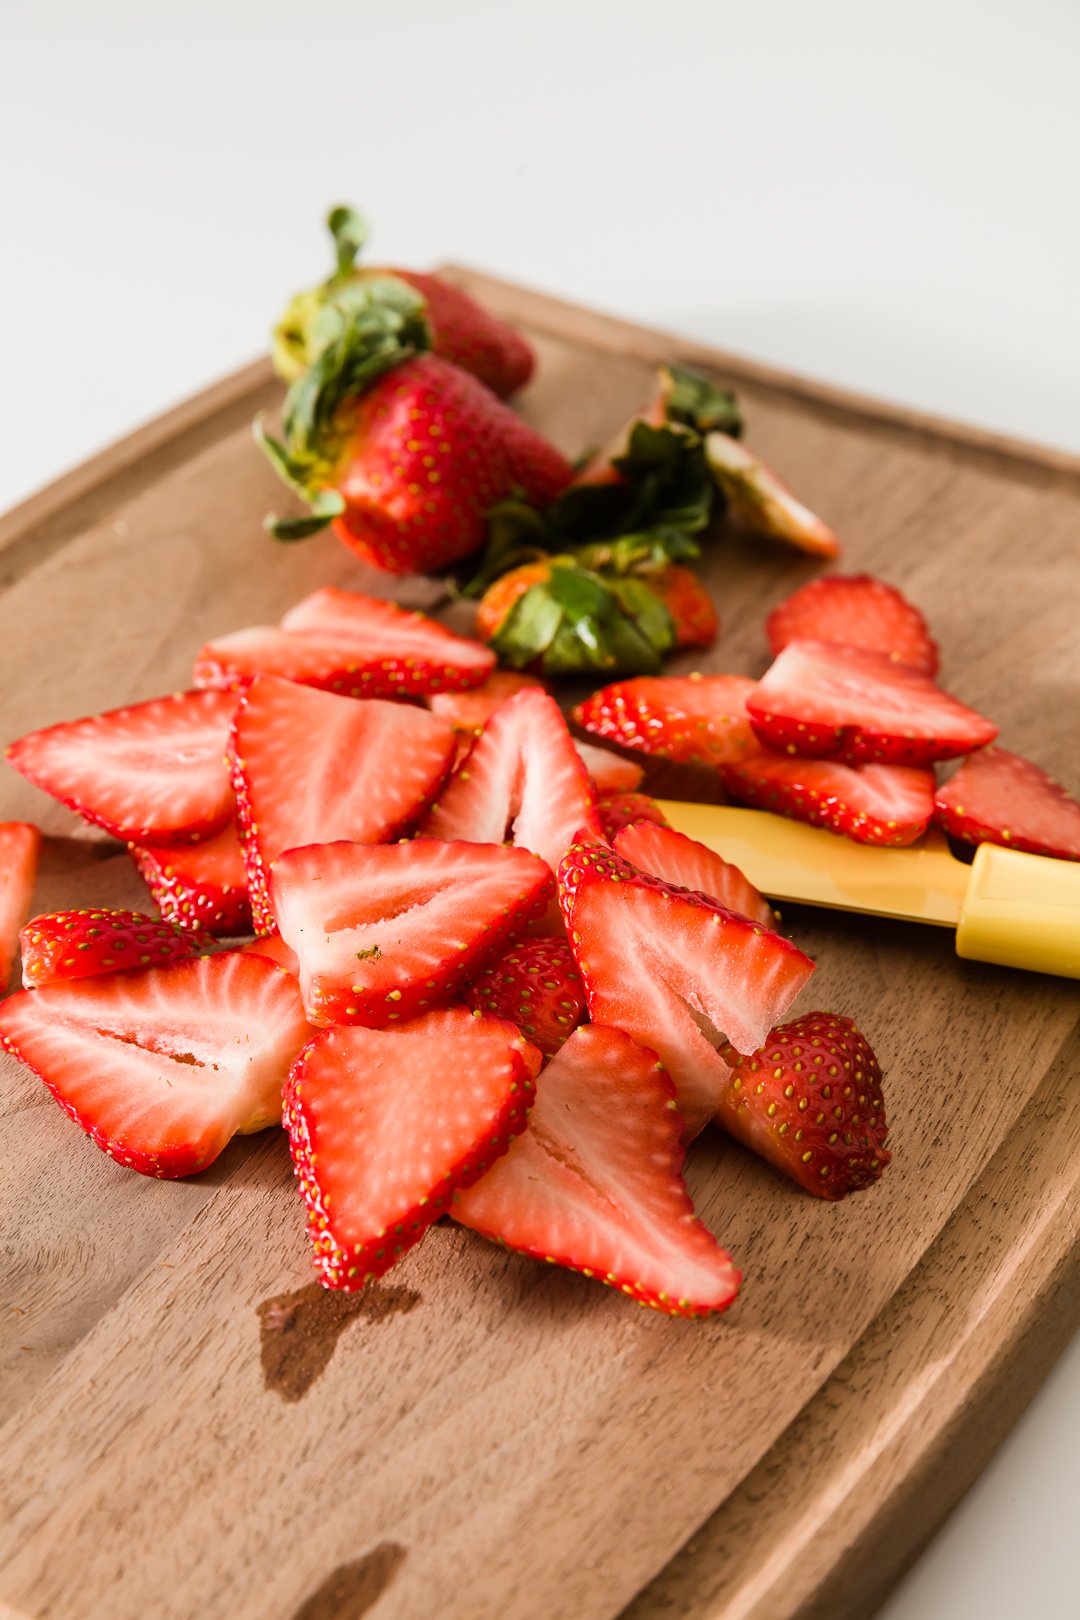 a wooden cutting board with sliced strawberries and a yellow knife